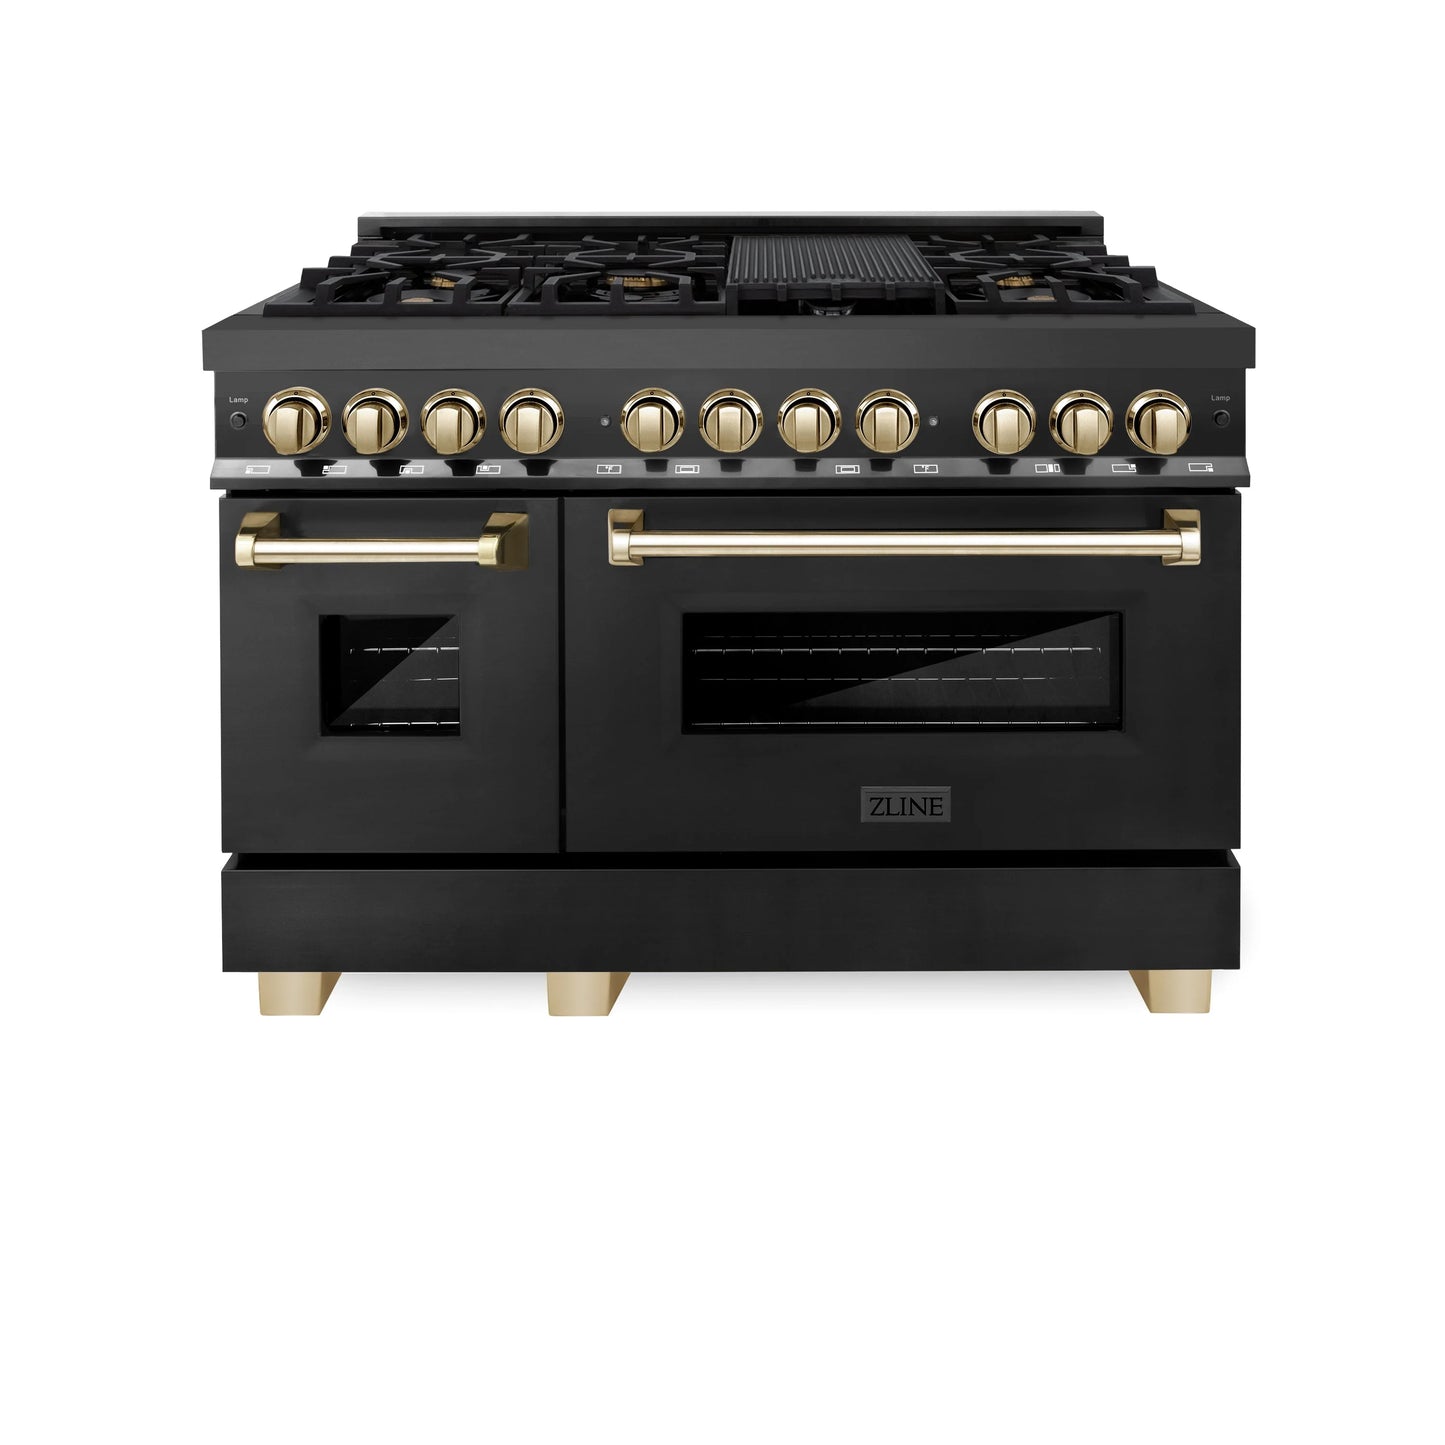 ZLINE Autograph Edition 48 in. Dual Fuel Range with Gas Stove and Electric Oven in Black Stainless Steel with Gold Accents (RABZ-48-G)